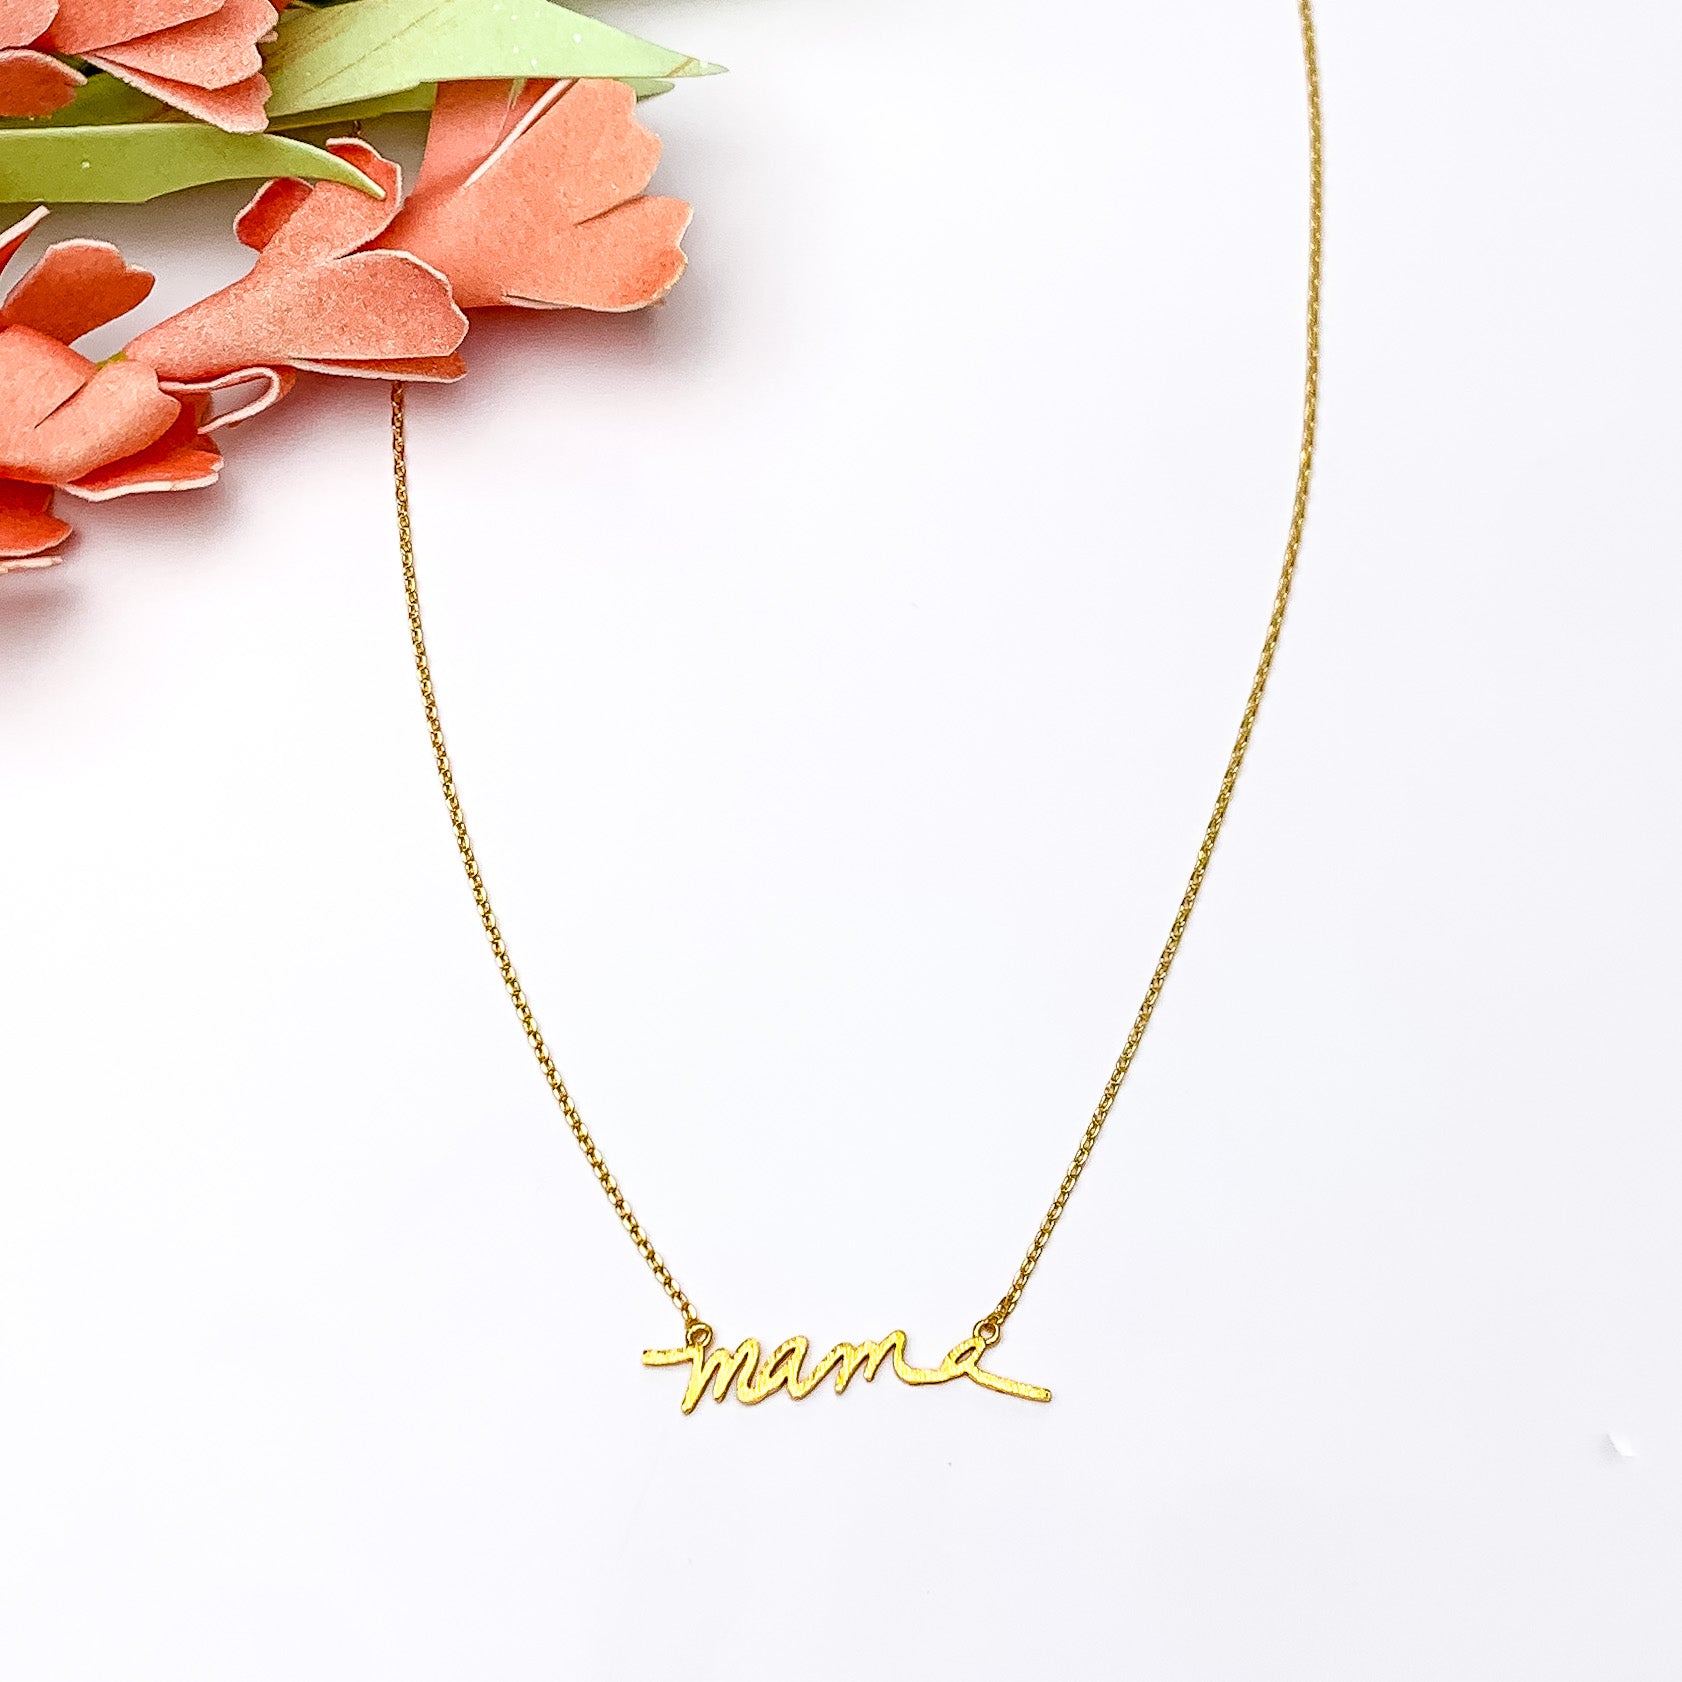 Mama Chain Necklace in Gold Tone - Giddy Up Glamour Boutique